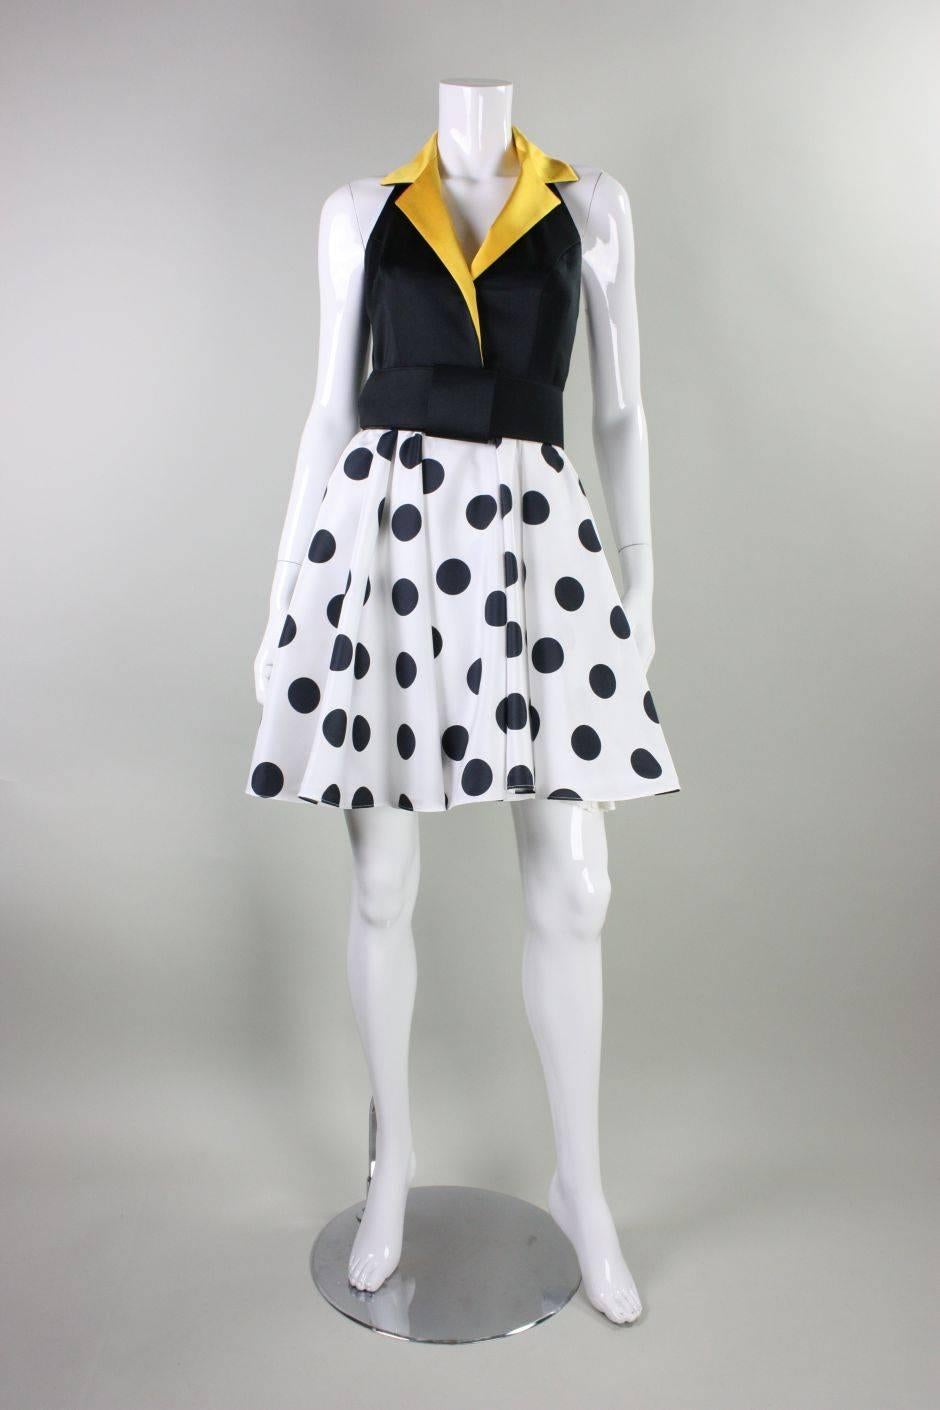 Vintage dress from Kathryn Conover New York by Night dates to the 1980's and features a black bodice with a yellow notched collar. Black and white polka-dotted skirt has a narrow band of synthetic horsehair to give it volume.  Detached wide belt has